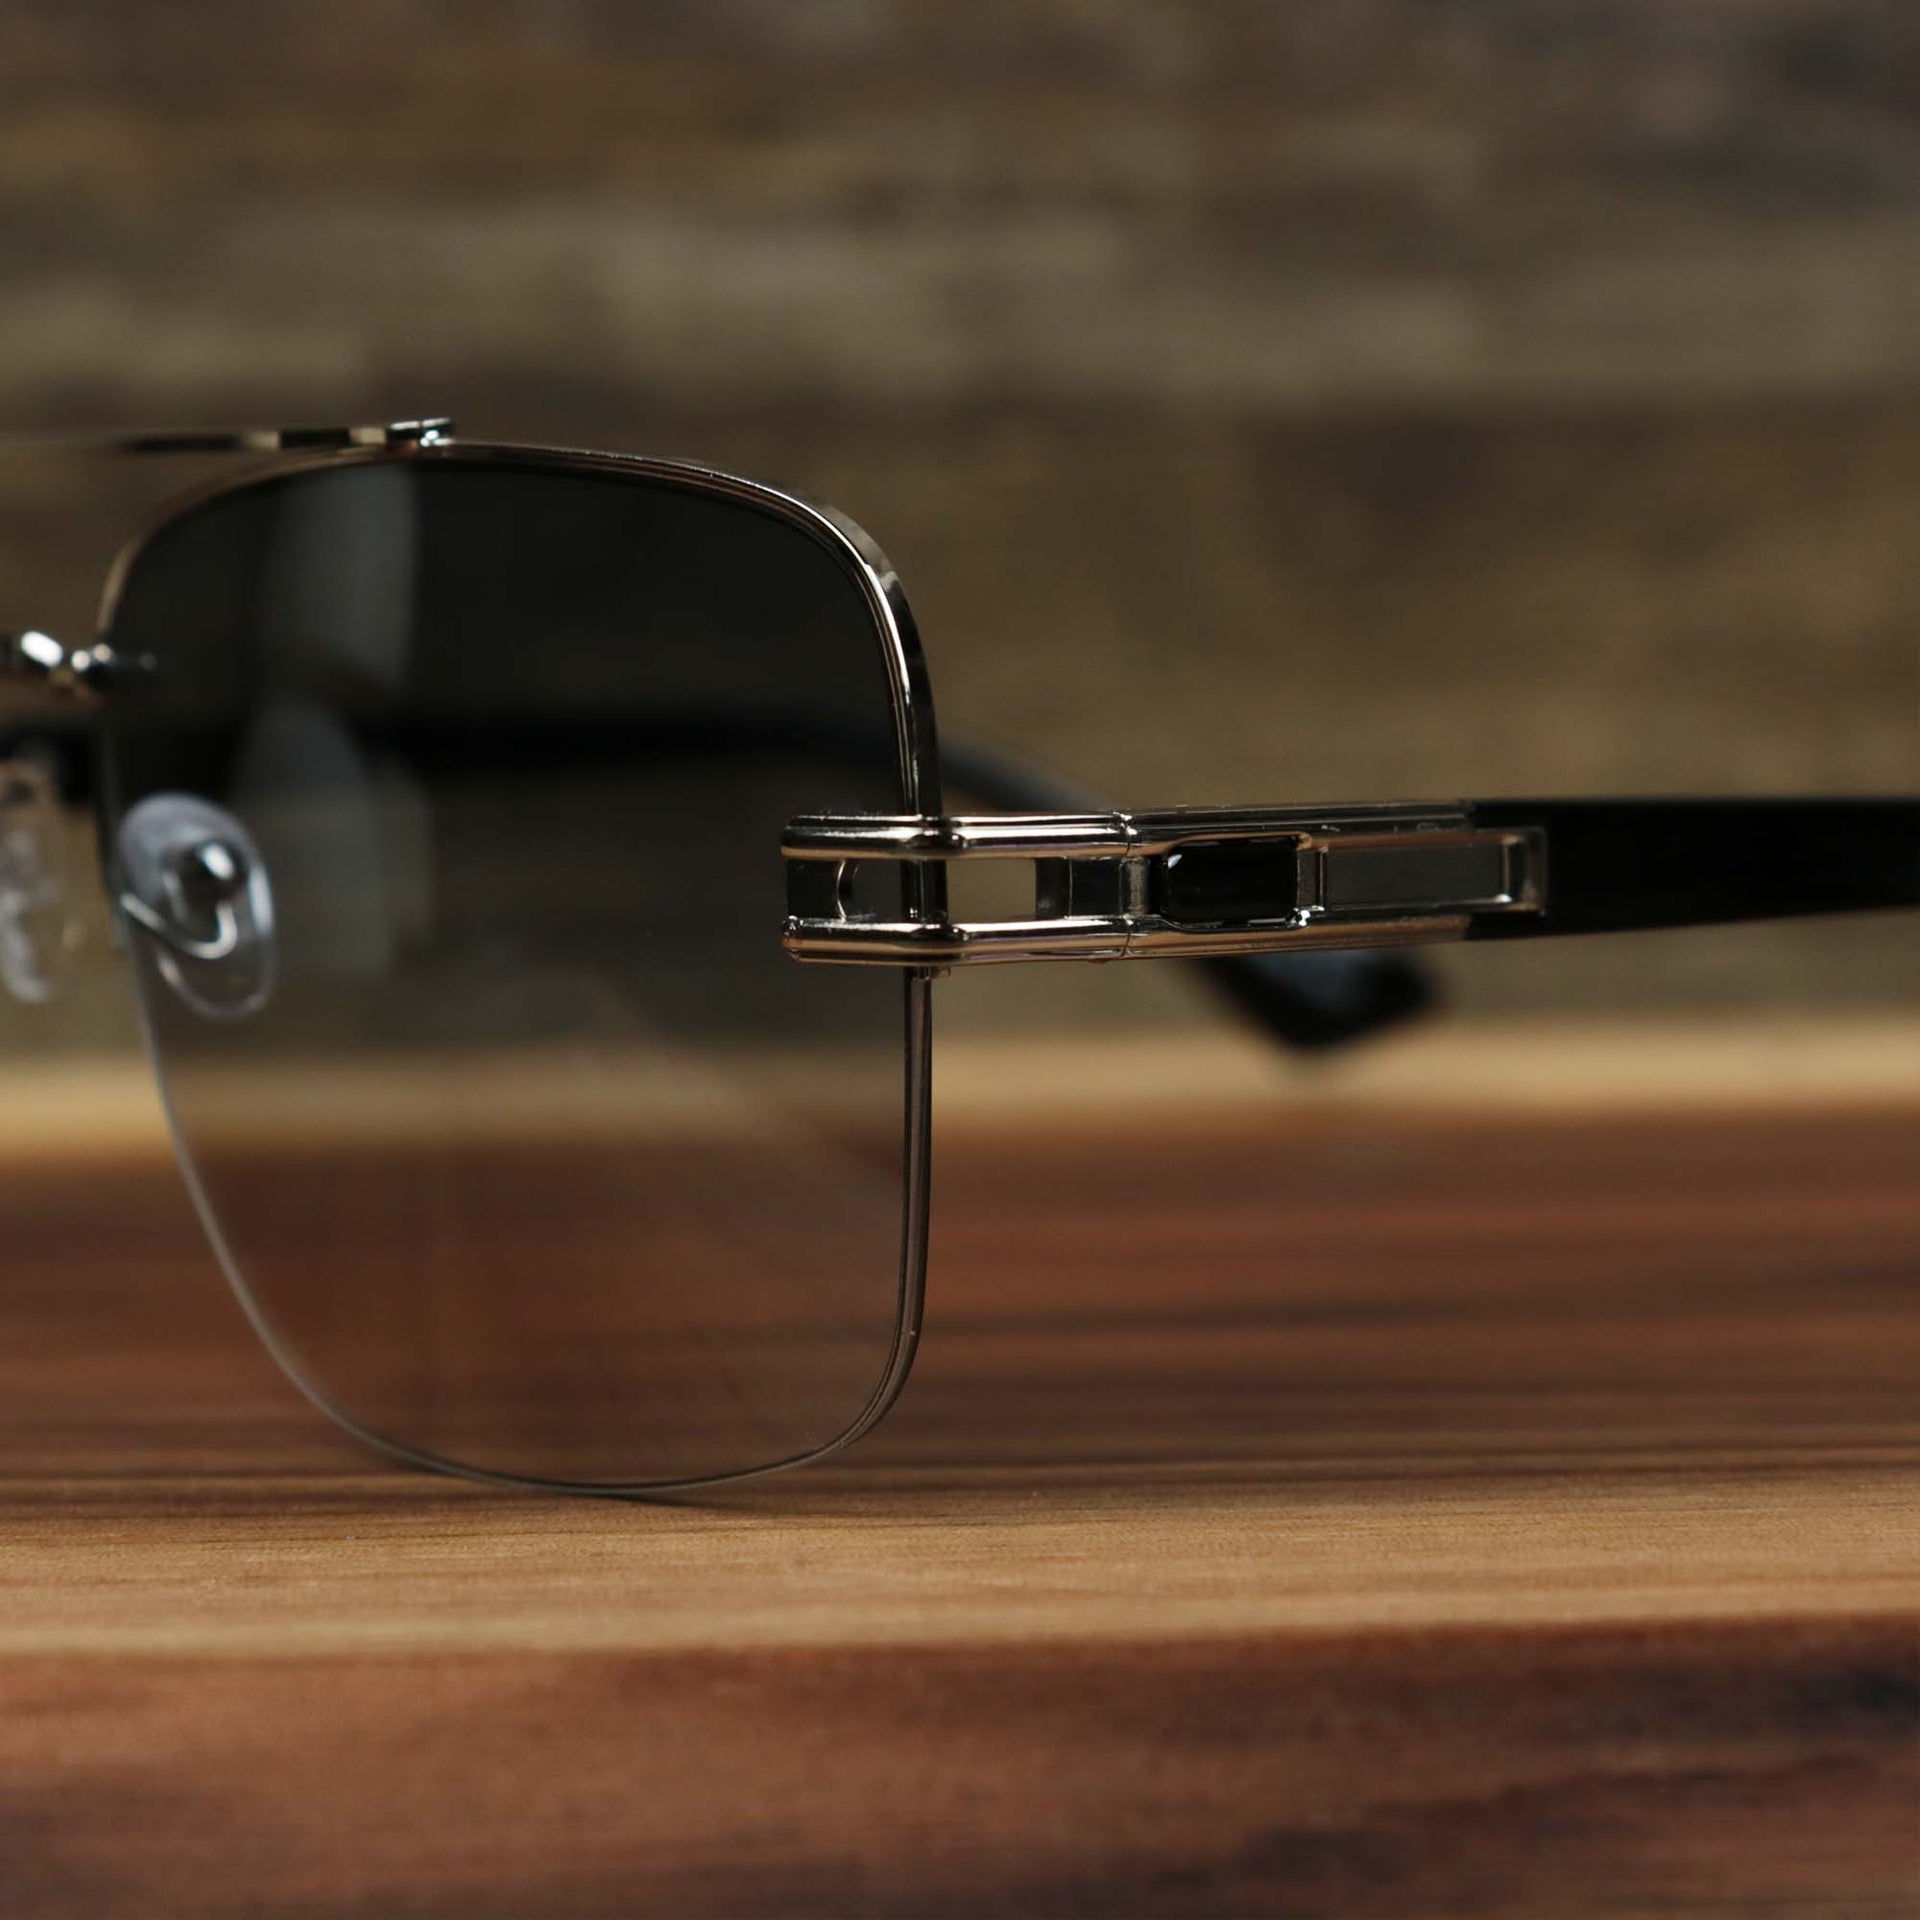 The hinge on the Round Rectangle Frame Blue Lens Sunglasses with Silver Frame